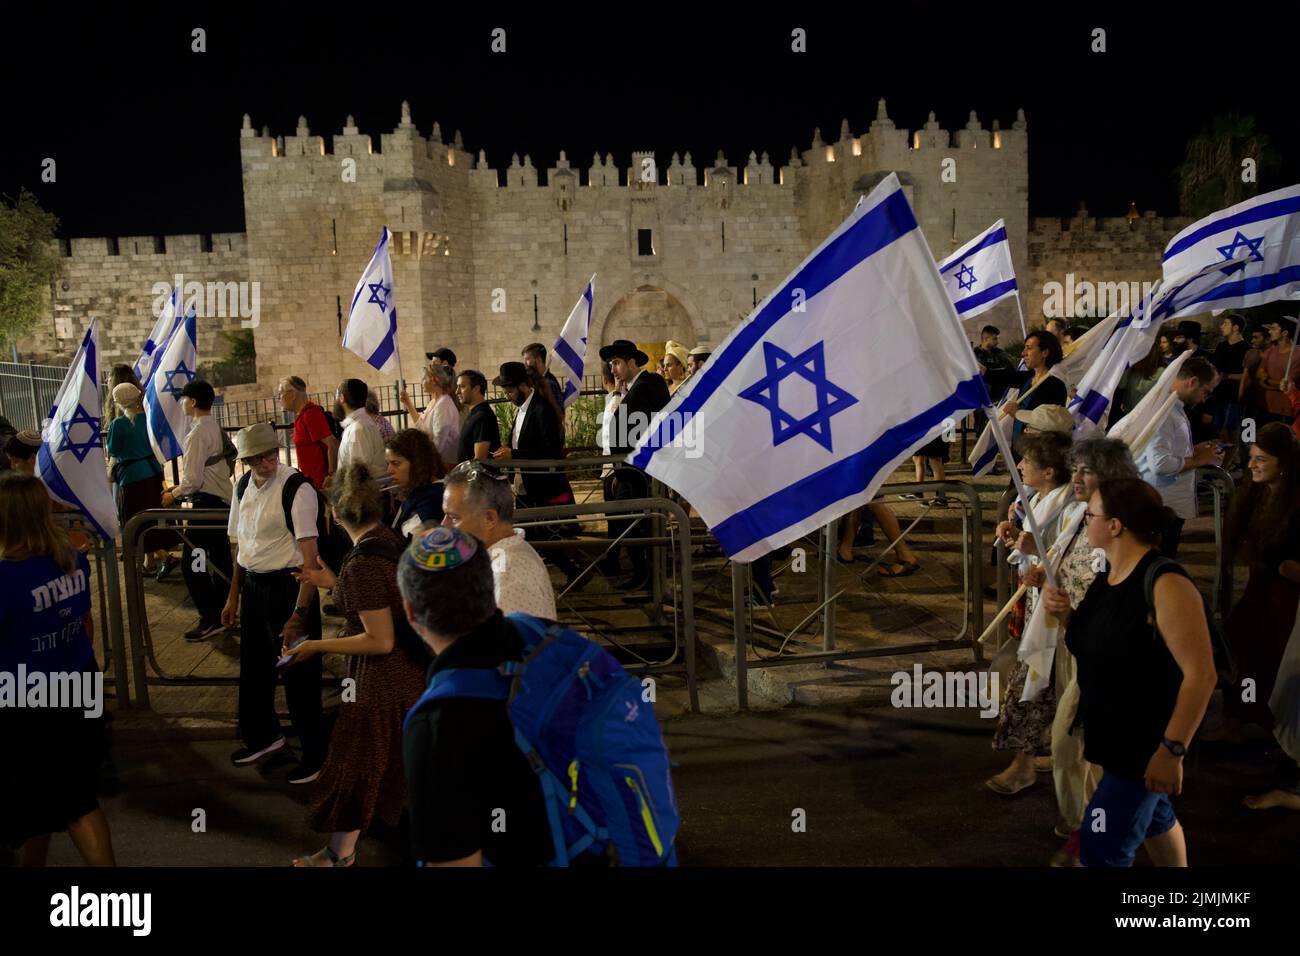 Israeli activists march holding the Israeli flag near Damascus gate in Jerusalem in a traditional procession around the Old City walls marking Tisha B'Av an annual fast day in Judaism, on which a number of disasters in Jewish history occurred, primarily the destruction of both Solomon's Temple by the Neo-Babylonian Empire and the Second Temple by the Roman Empire in Jerusalem. The march was organized by organization promoting the reconstruction of a third Jewish temple on the temple mount. In Jerusalem, Israel on August 6, 2022. (Photo by Matan Golan/Sipa USA) Stock Photo